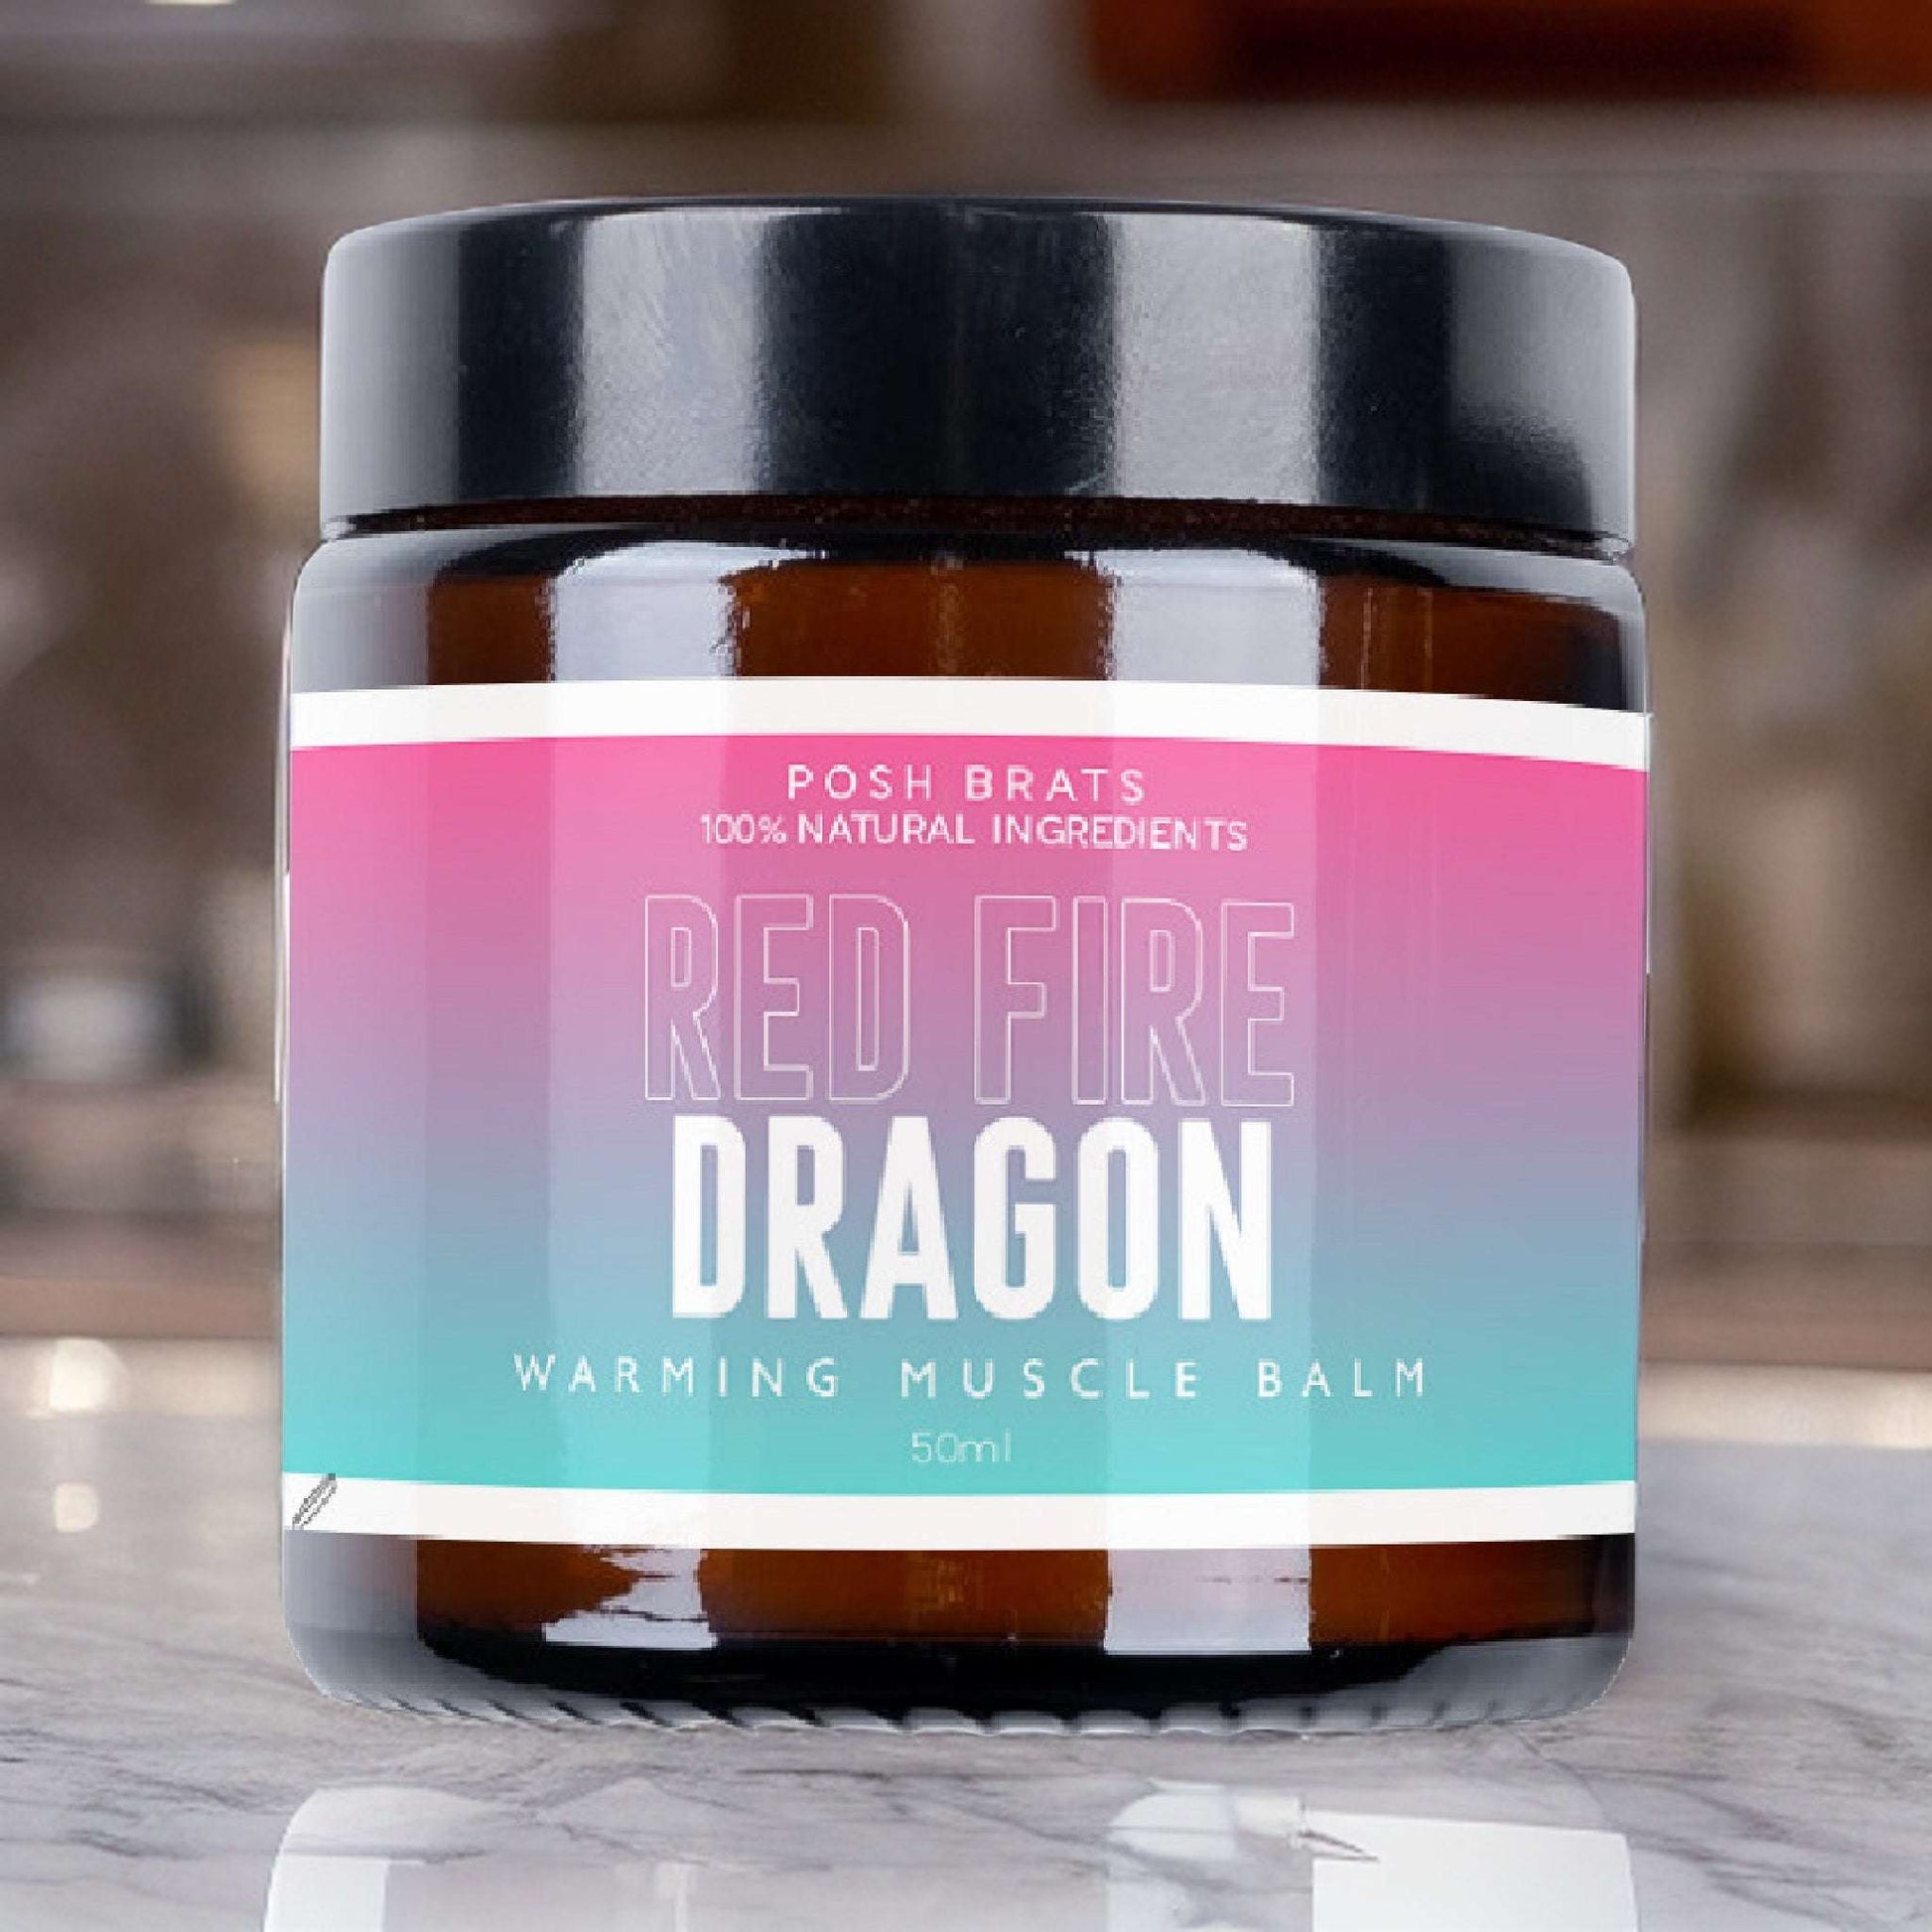 Red Dragon Fire Balm provides warming comfort for pesky aches. Unleash the dragon's fire on your discomfort now!